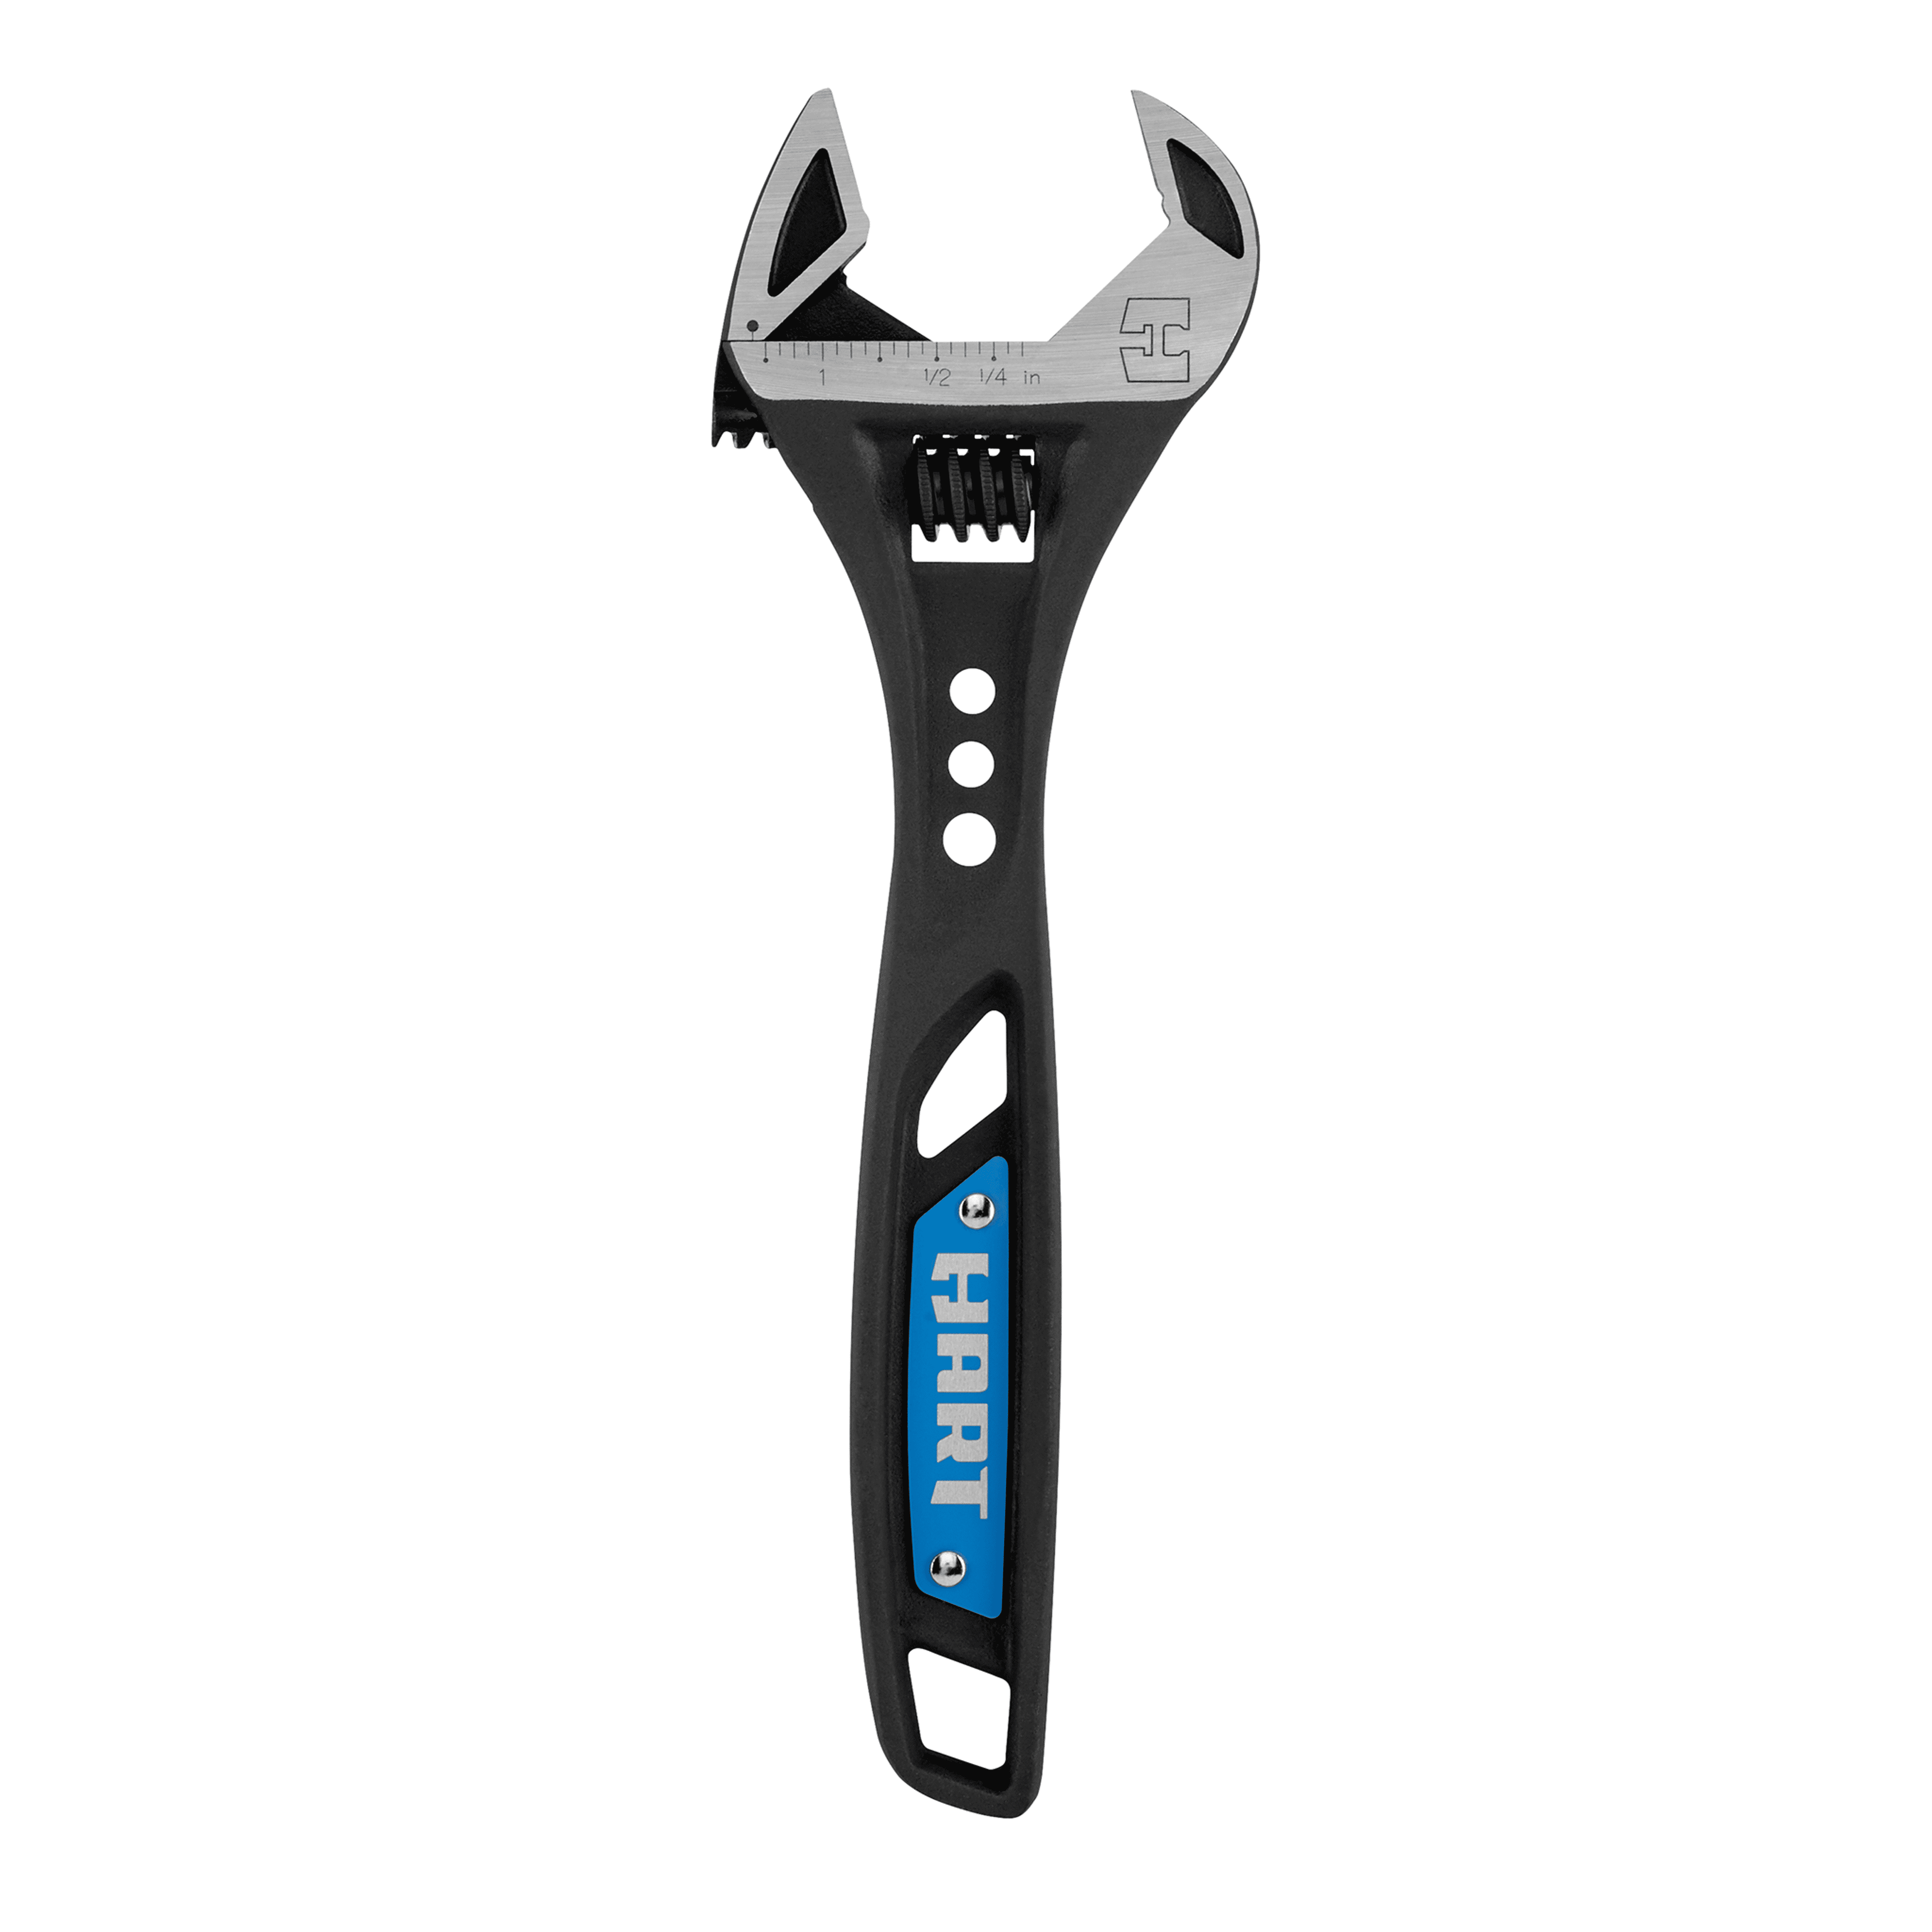 18" Adjustable WRENCH Spanner Tool XL DIY Work site HEAVY DUTY Forged STEEL x 1 